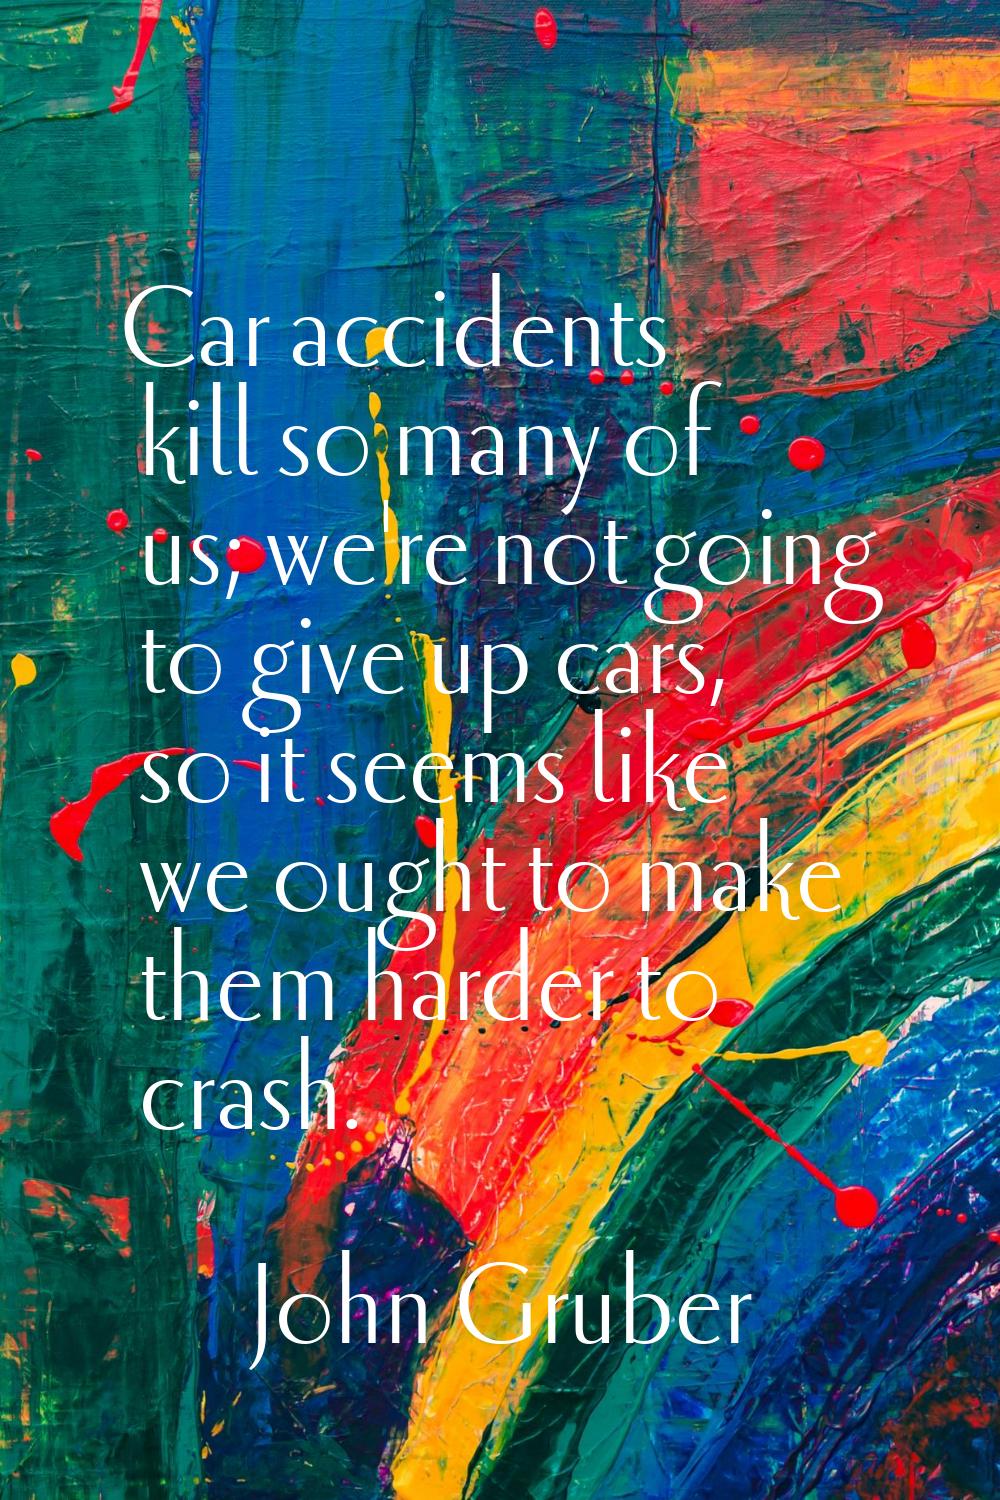 Car accidents kill so many of us; we're not going to give up cars, so it seems like we ought to mak